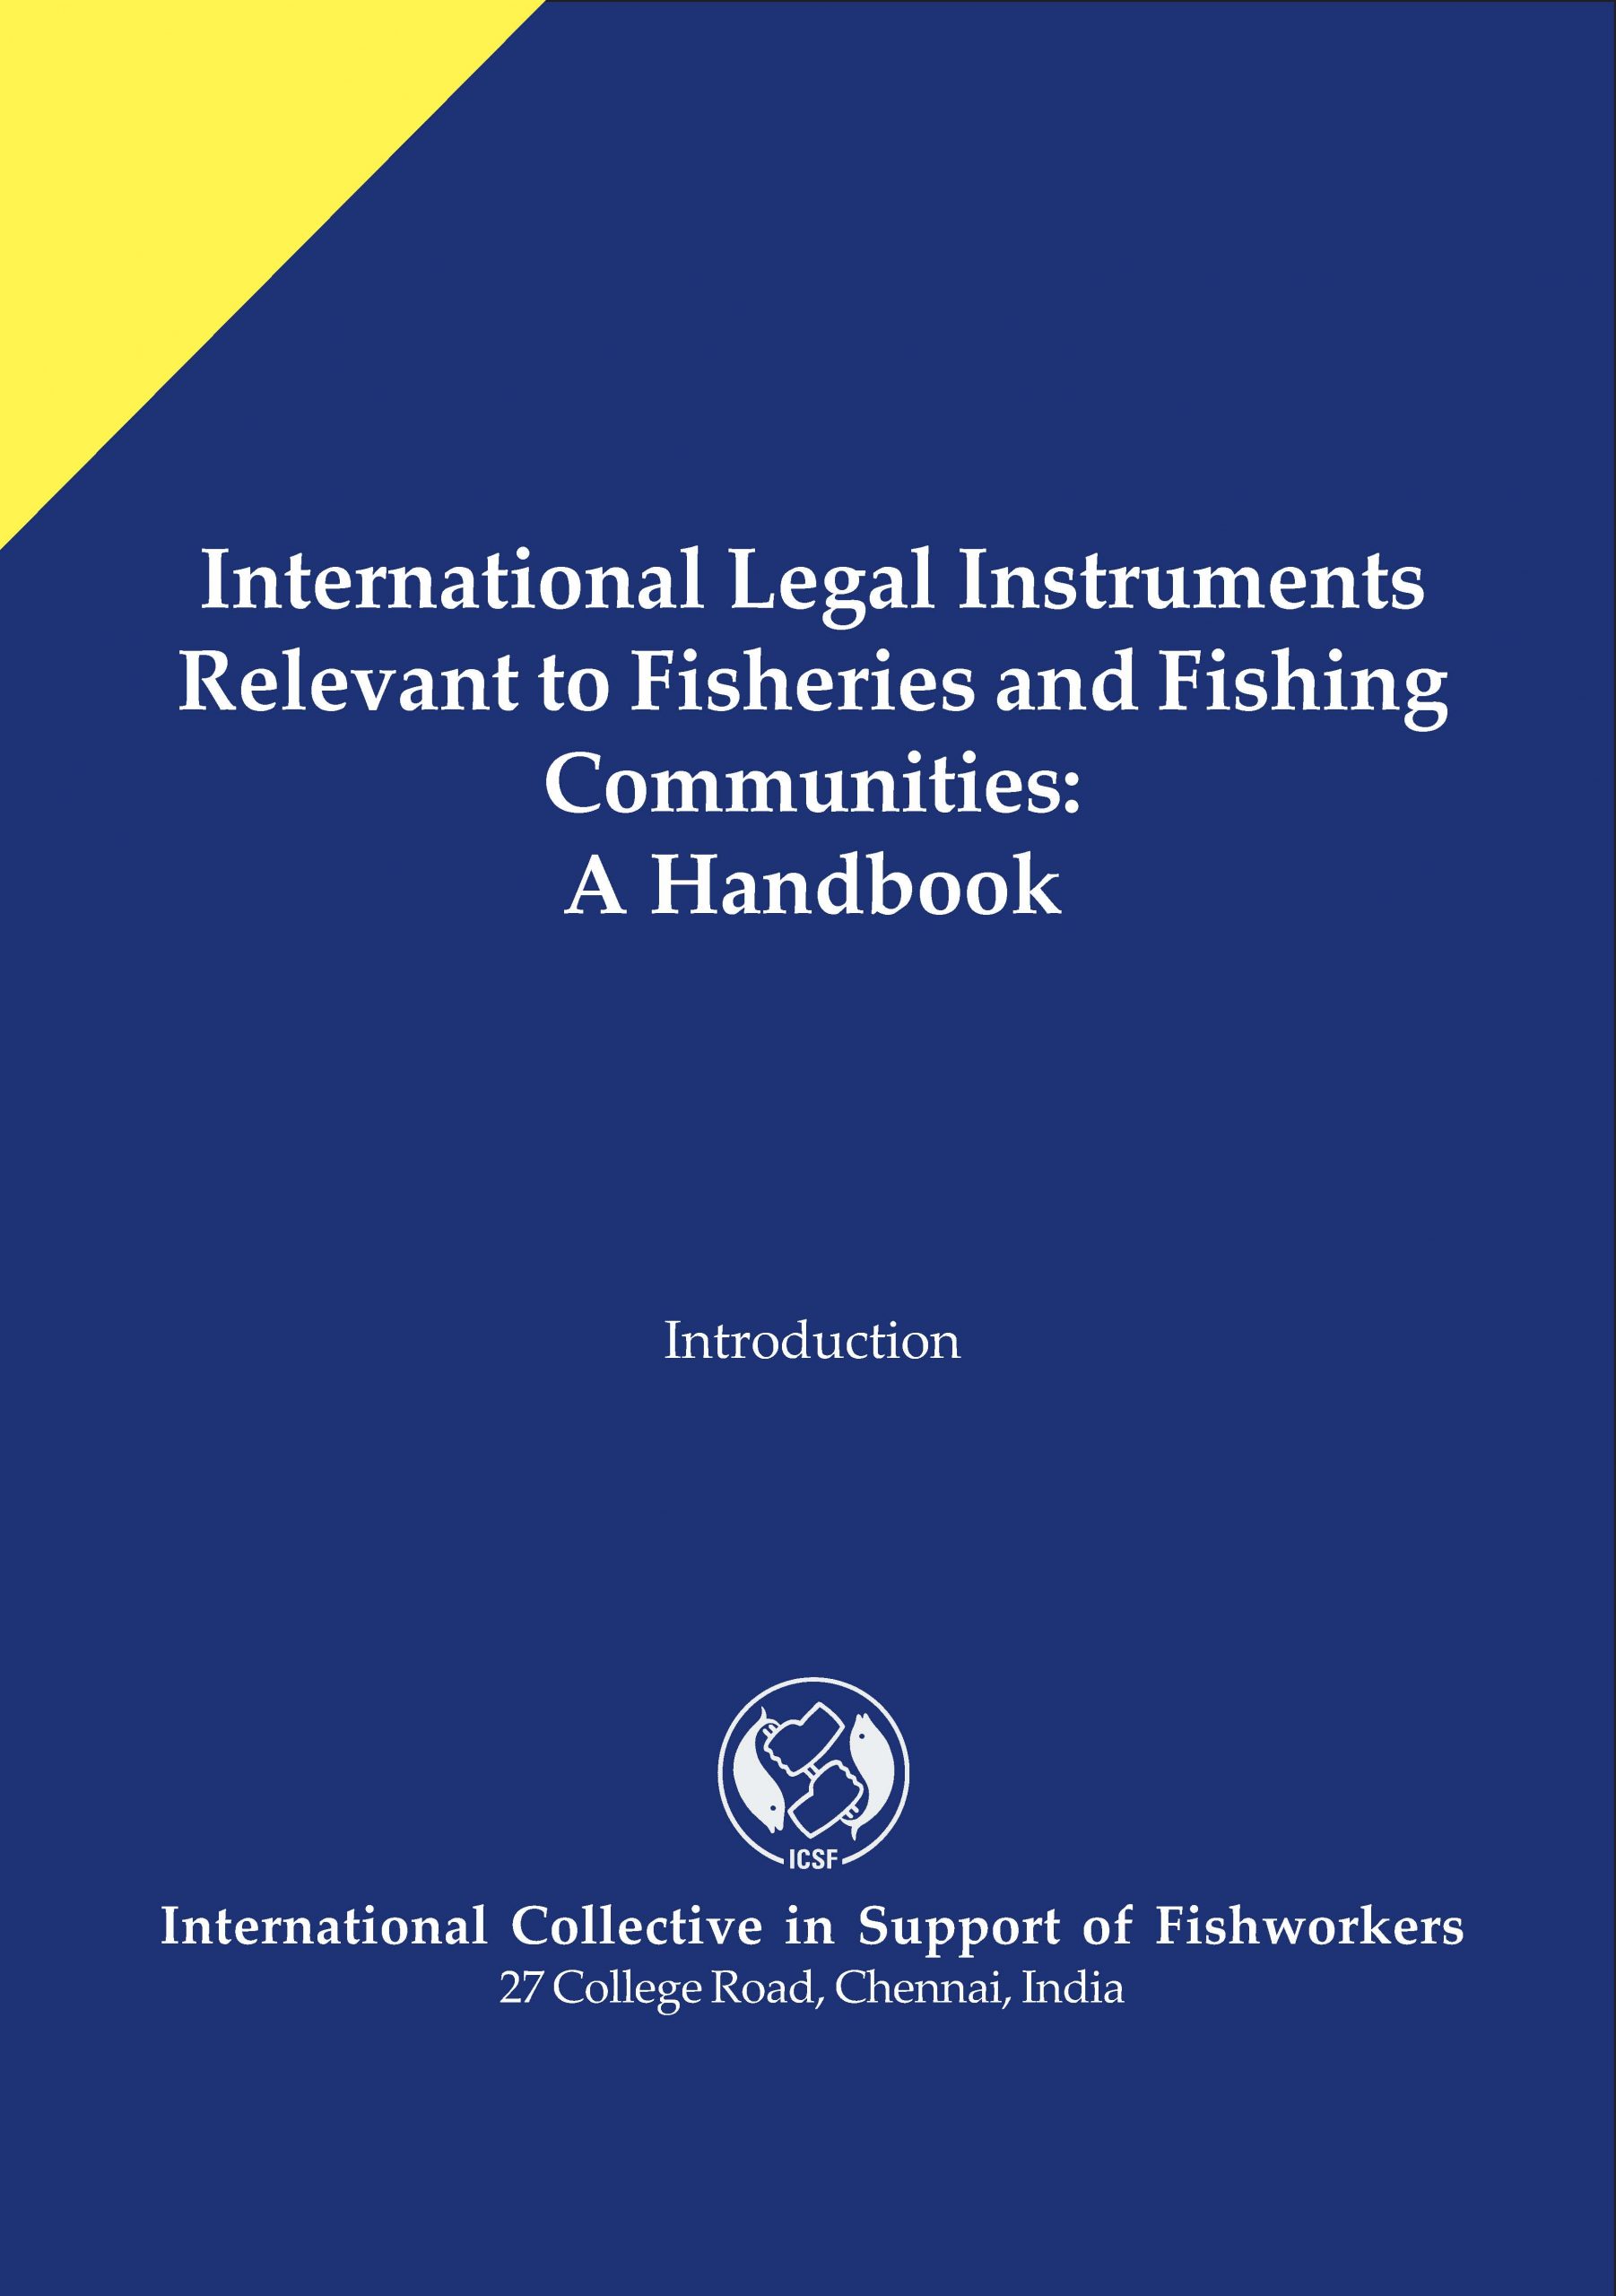 International Legal Instruments Relevant to Fisheries and Fishing Communities: A Handbook